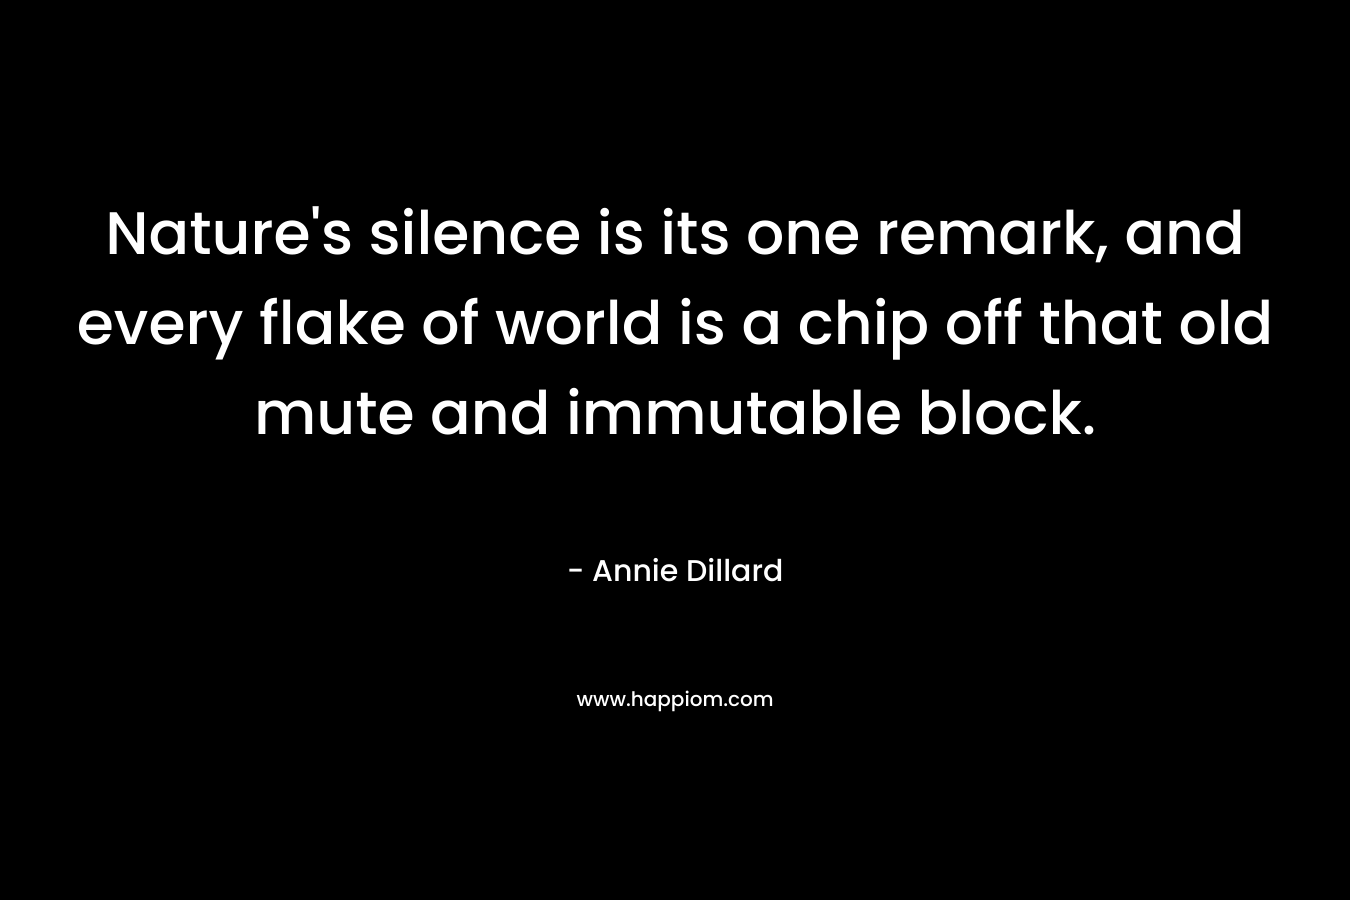 Nature's silence is its one remark, and every flake of world is a chip off that old mute and immutable block.